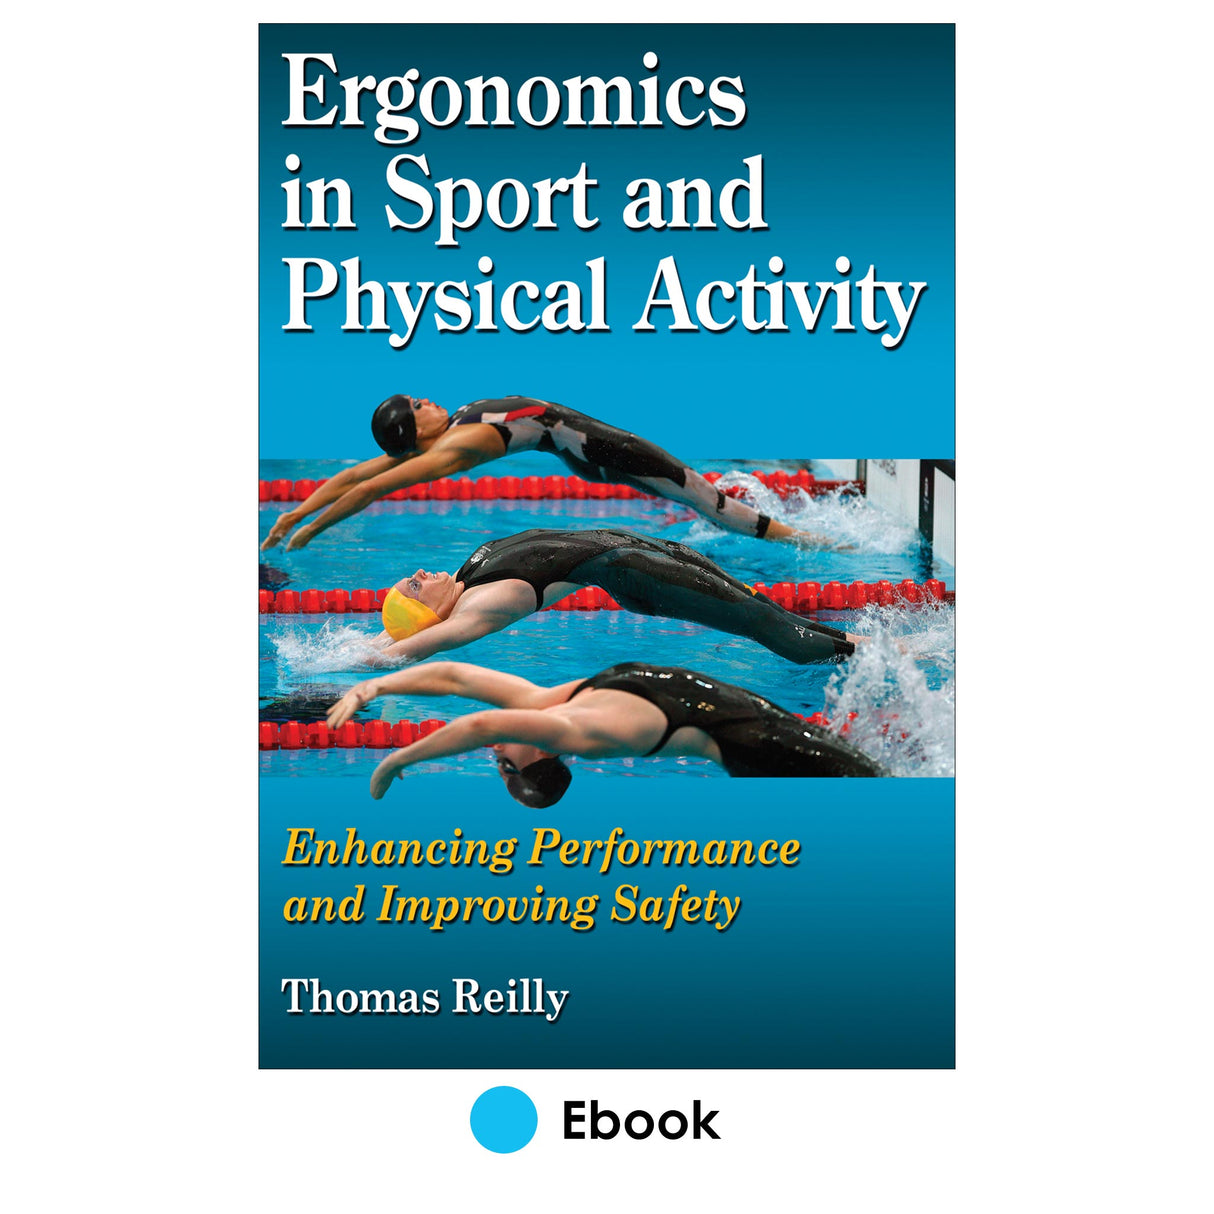 Ergonomics in Sport and Physical Activity PDF